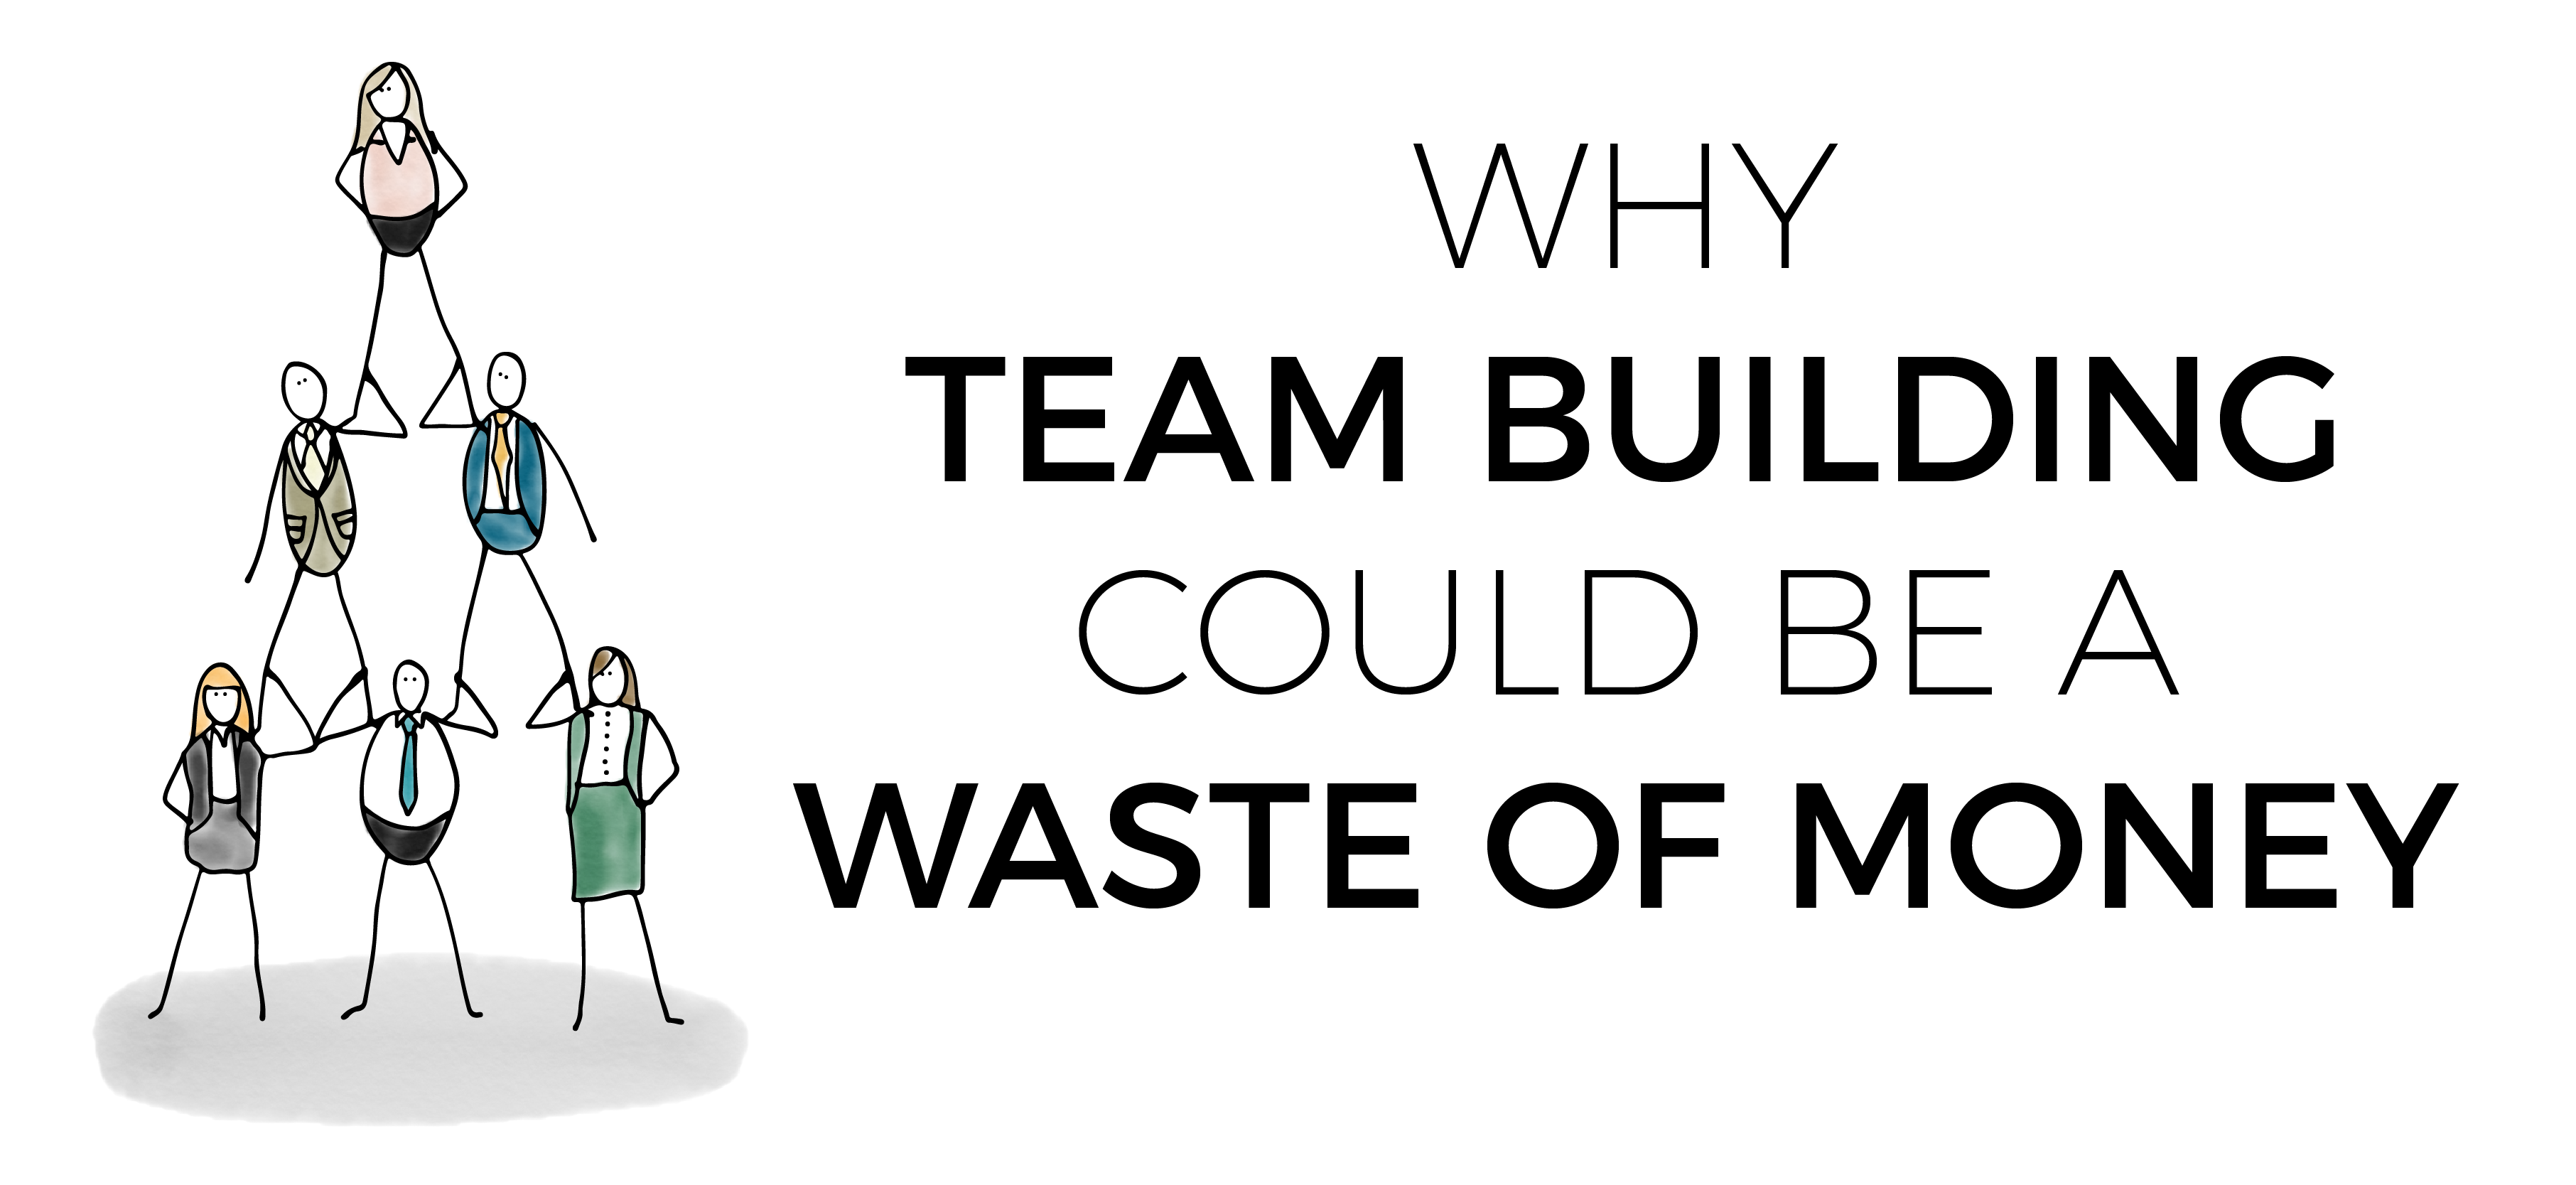 Why Team Building Could be a Waste of Money